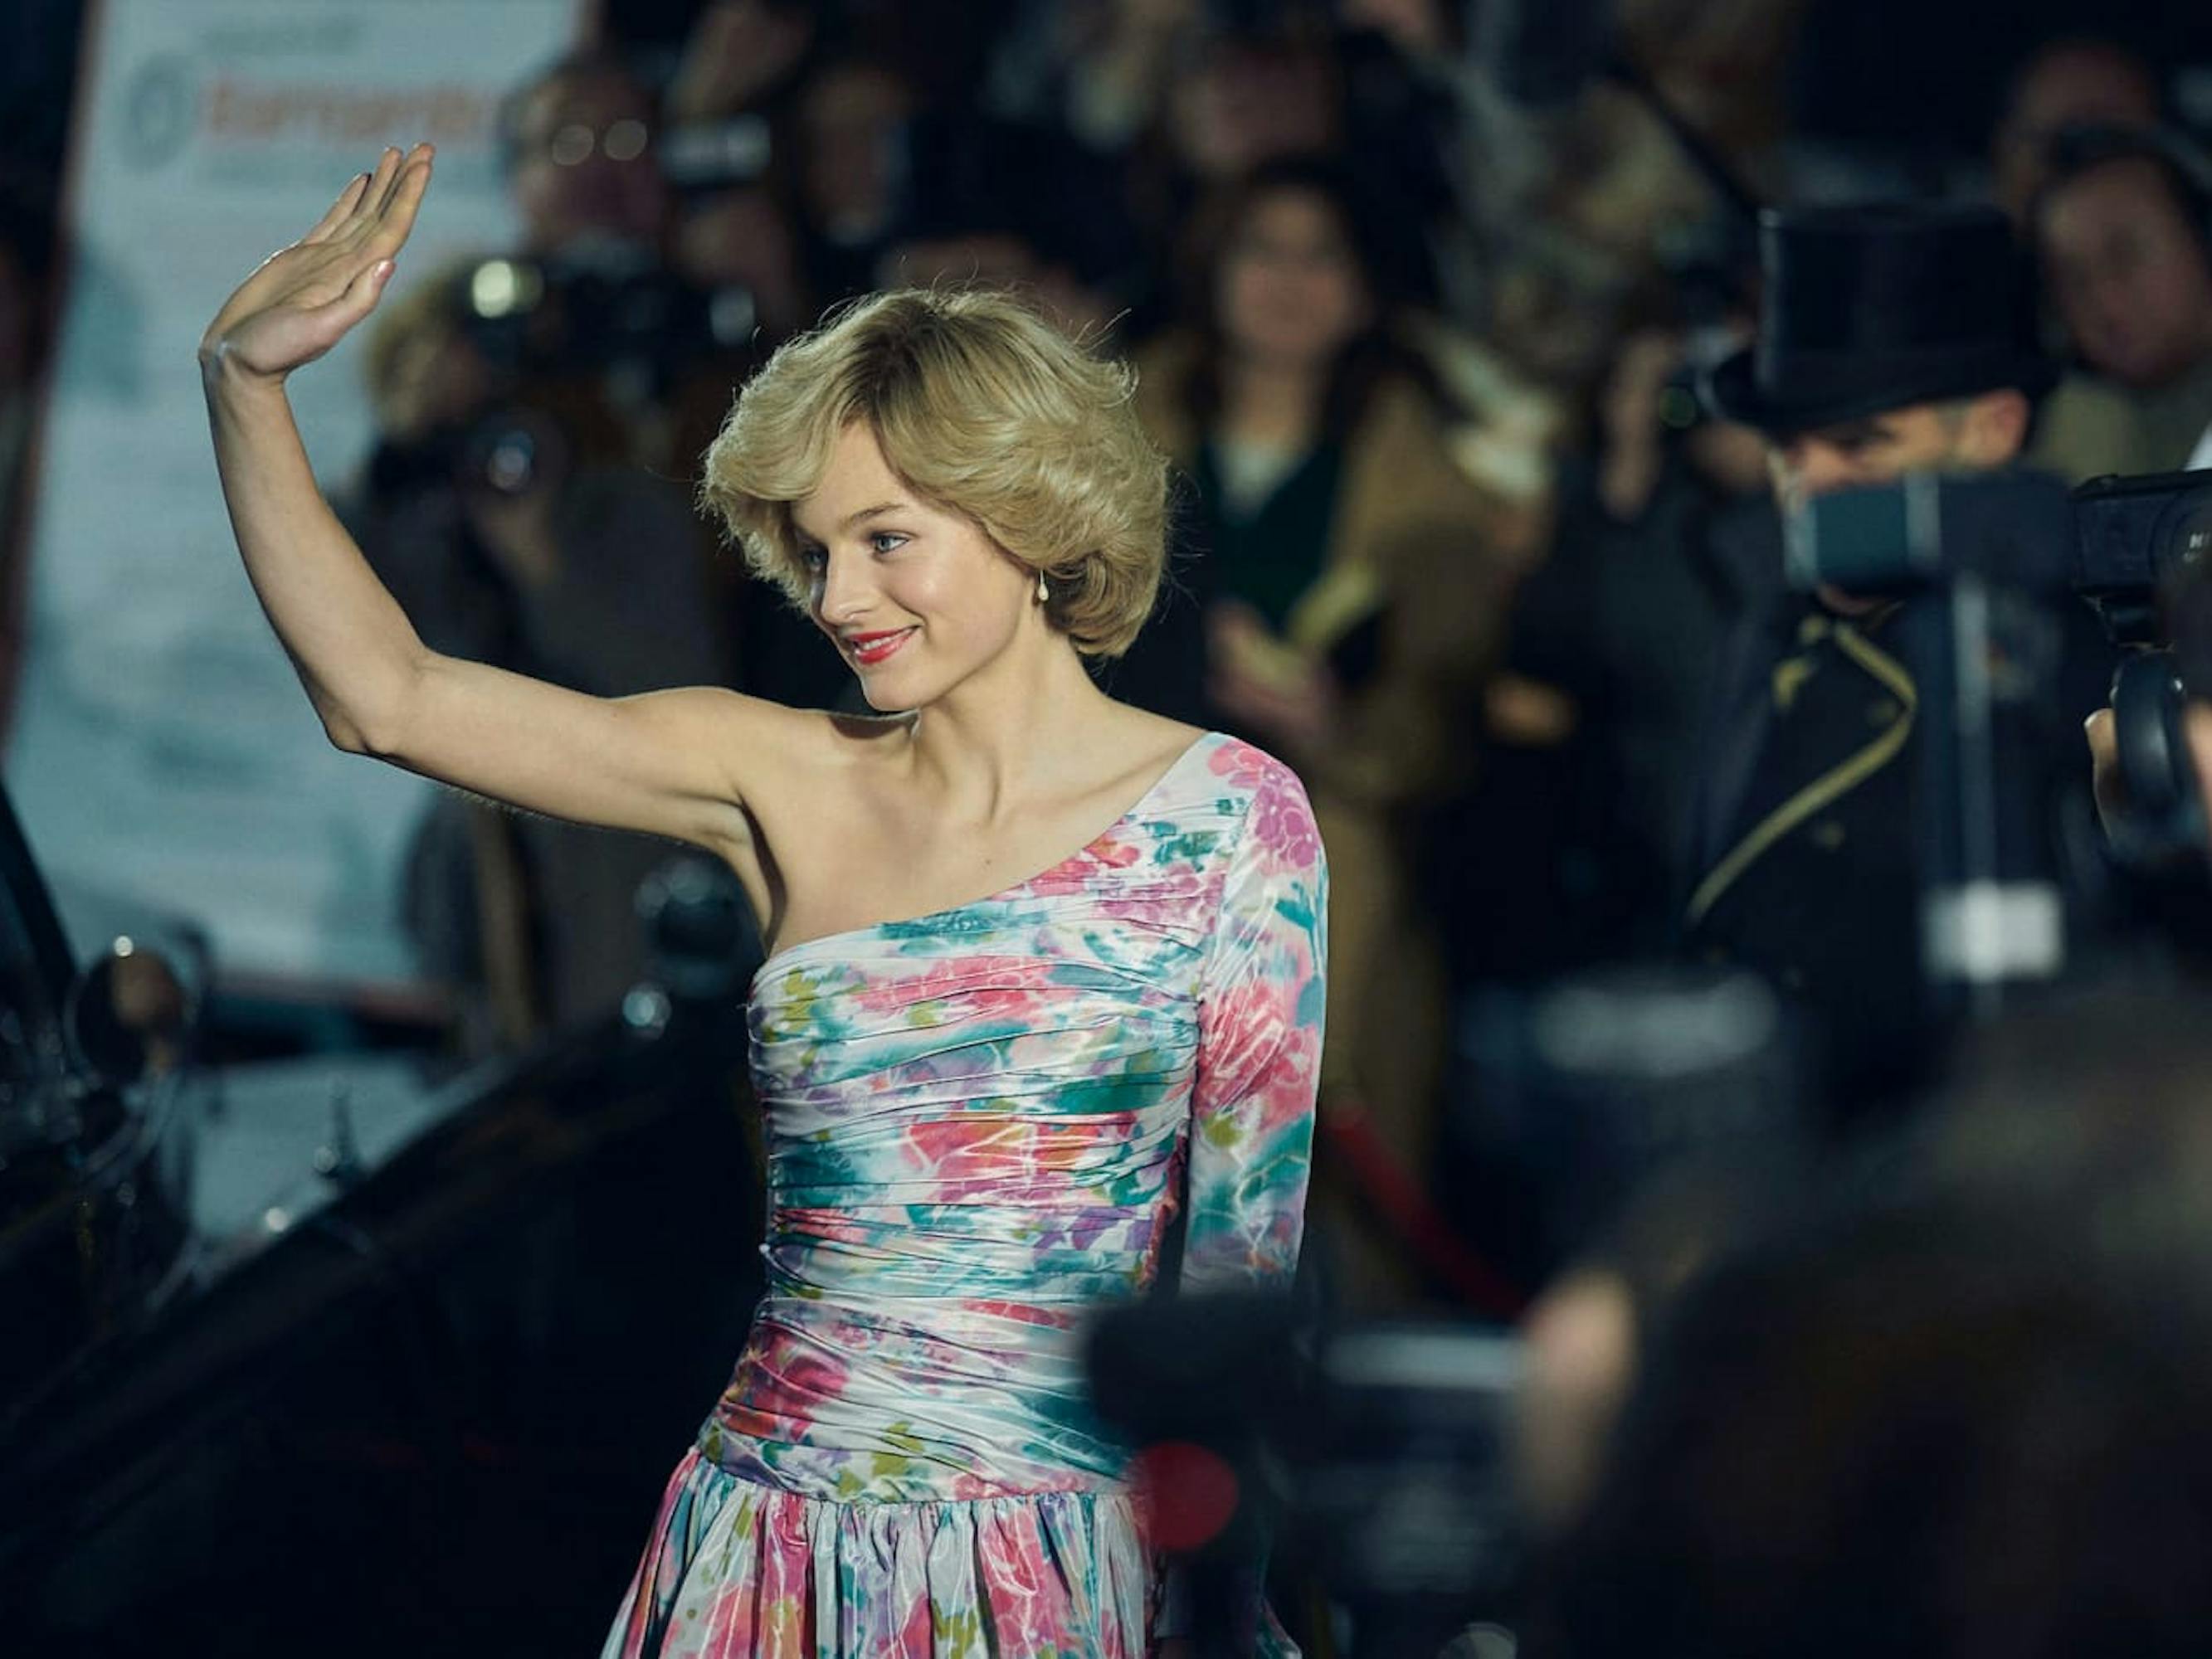 Diana (Emma Corrin) waves to the crowd, surrounded by people and cameras. She wears an off the shoulder floral dress.